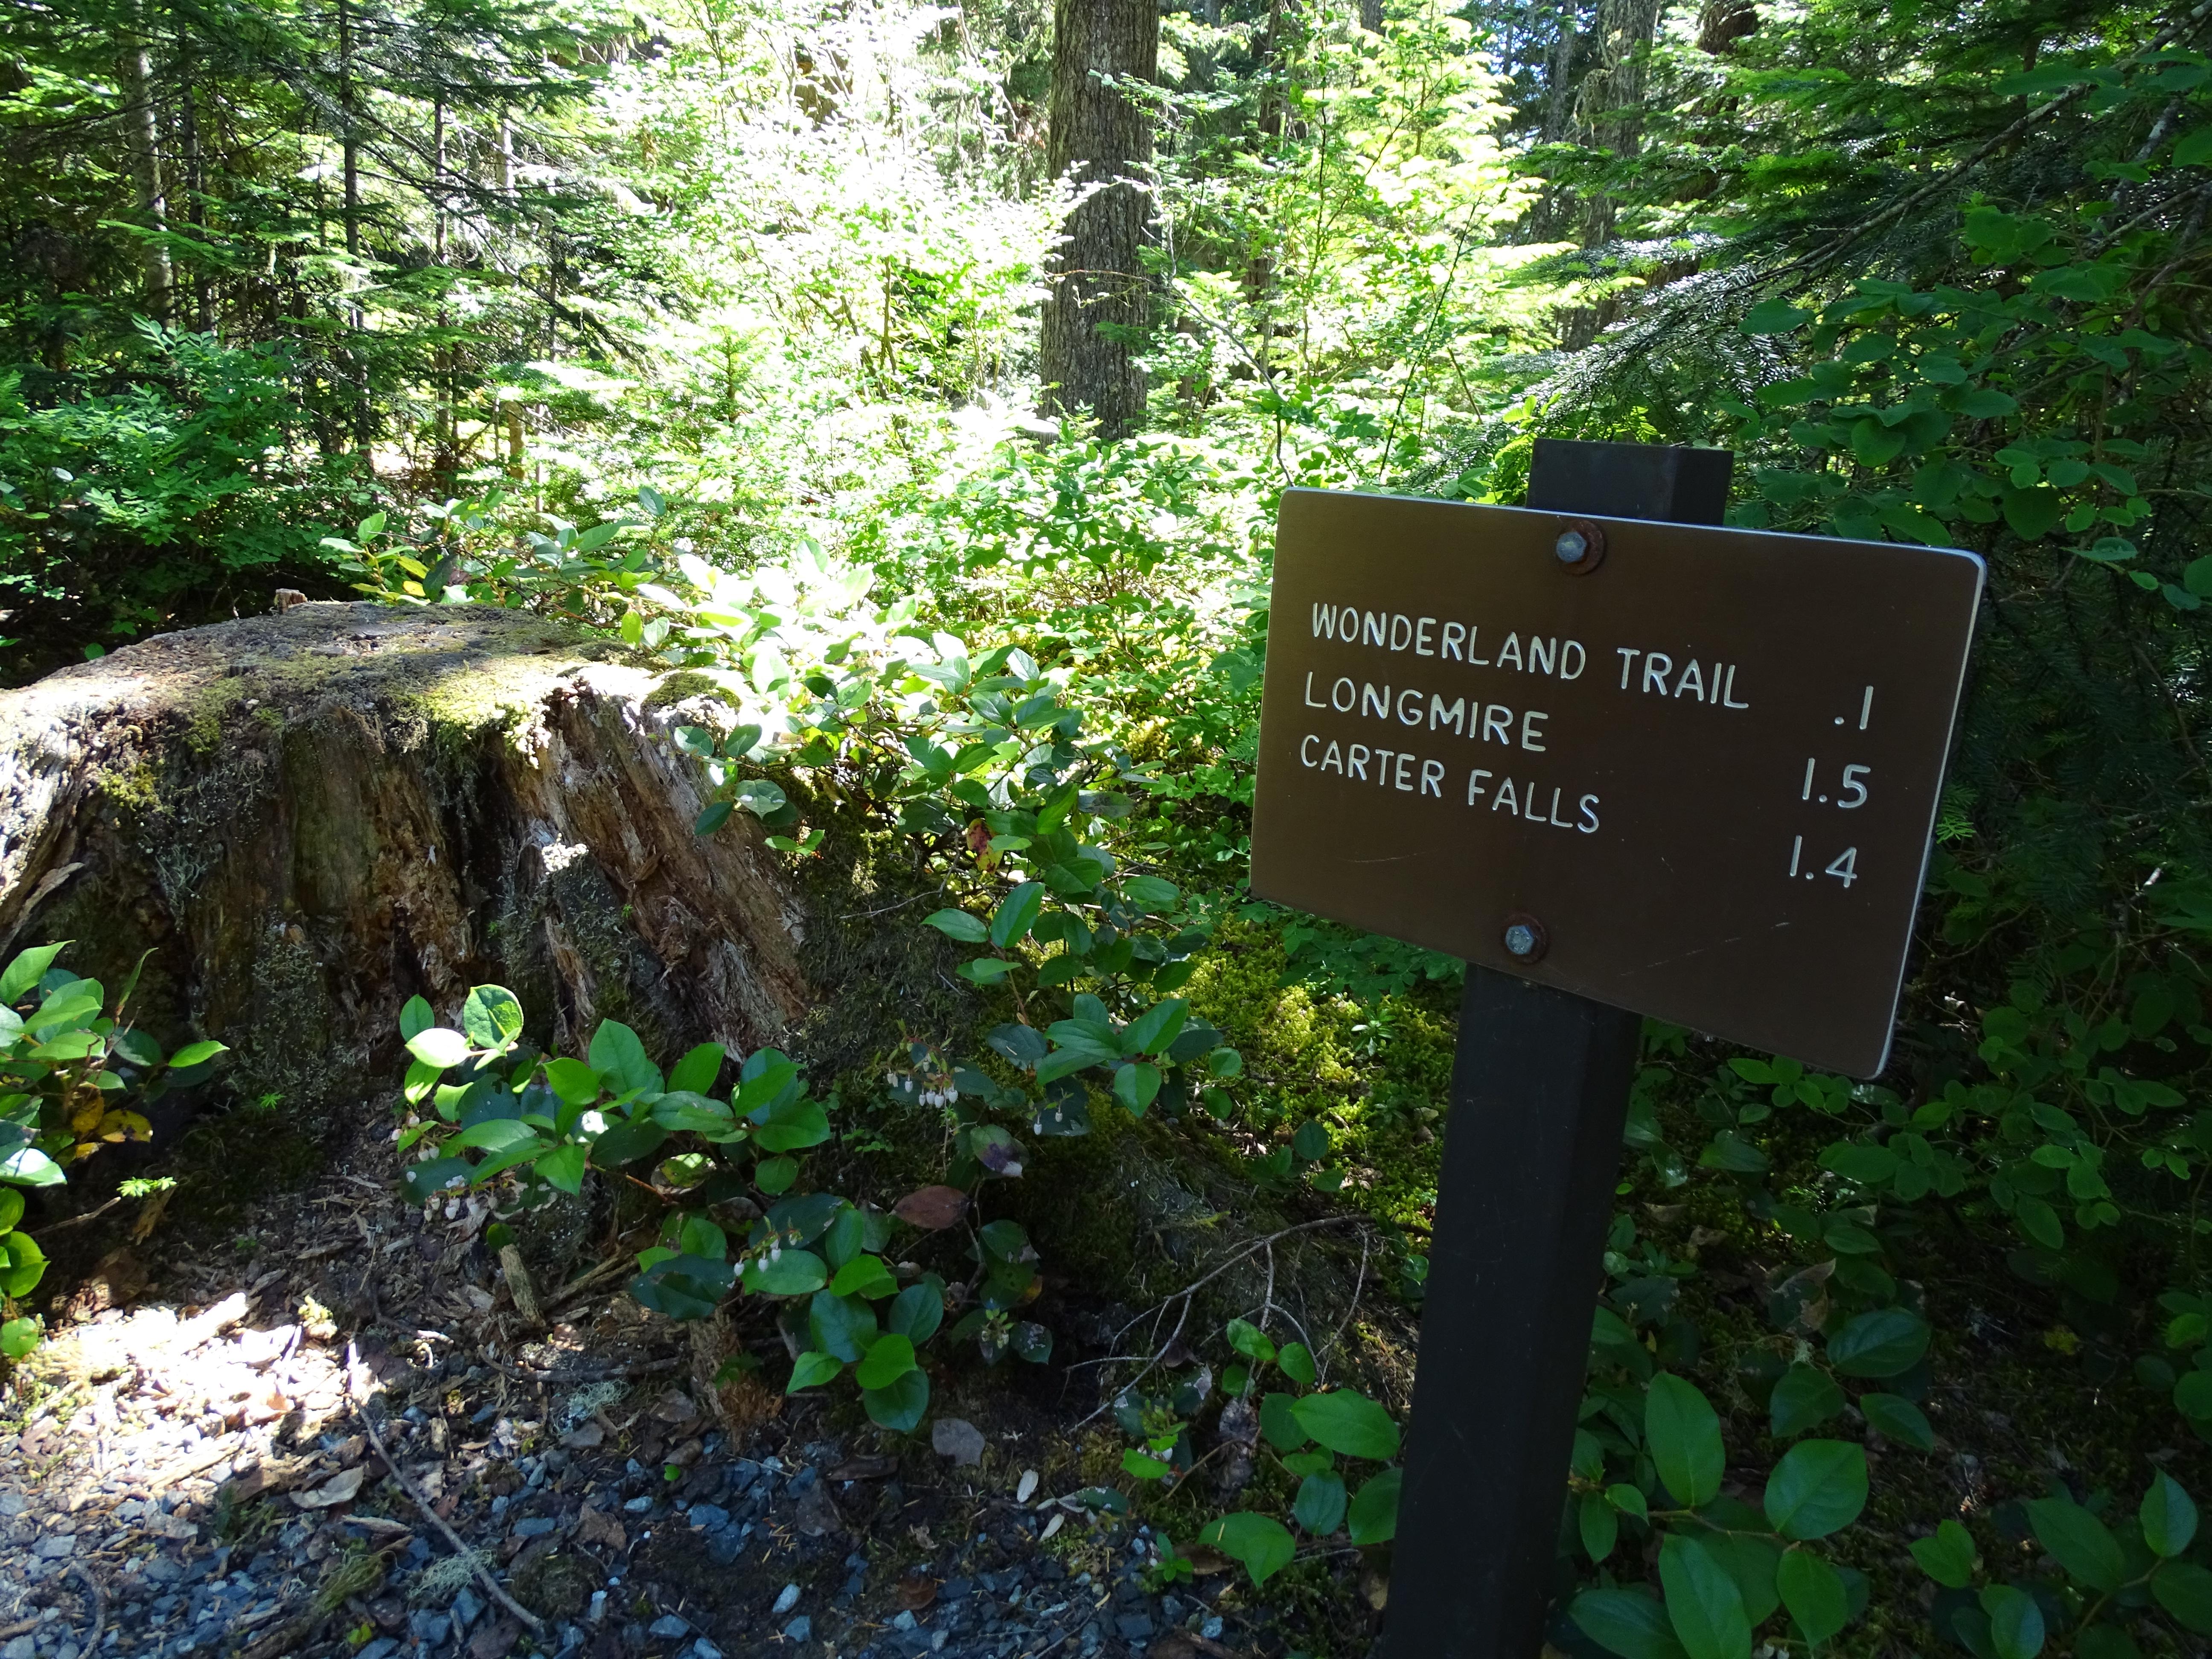 A brown sign noting the distance to trails in the area.